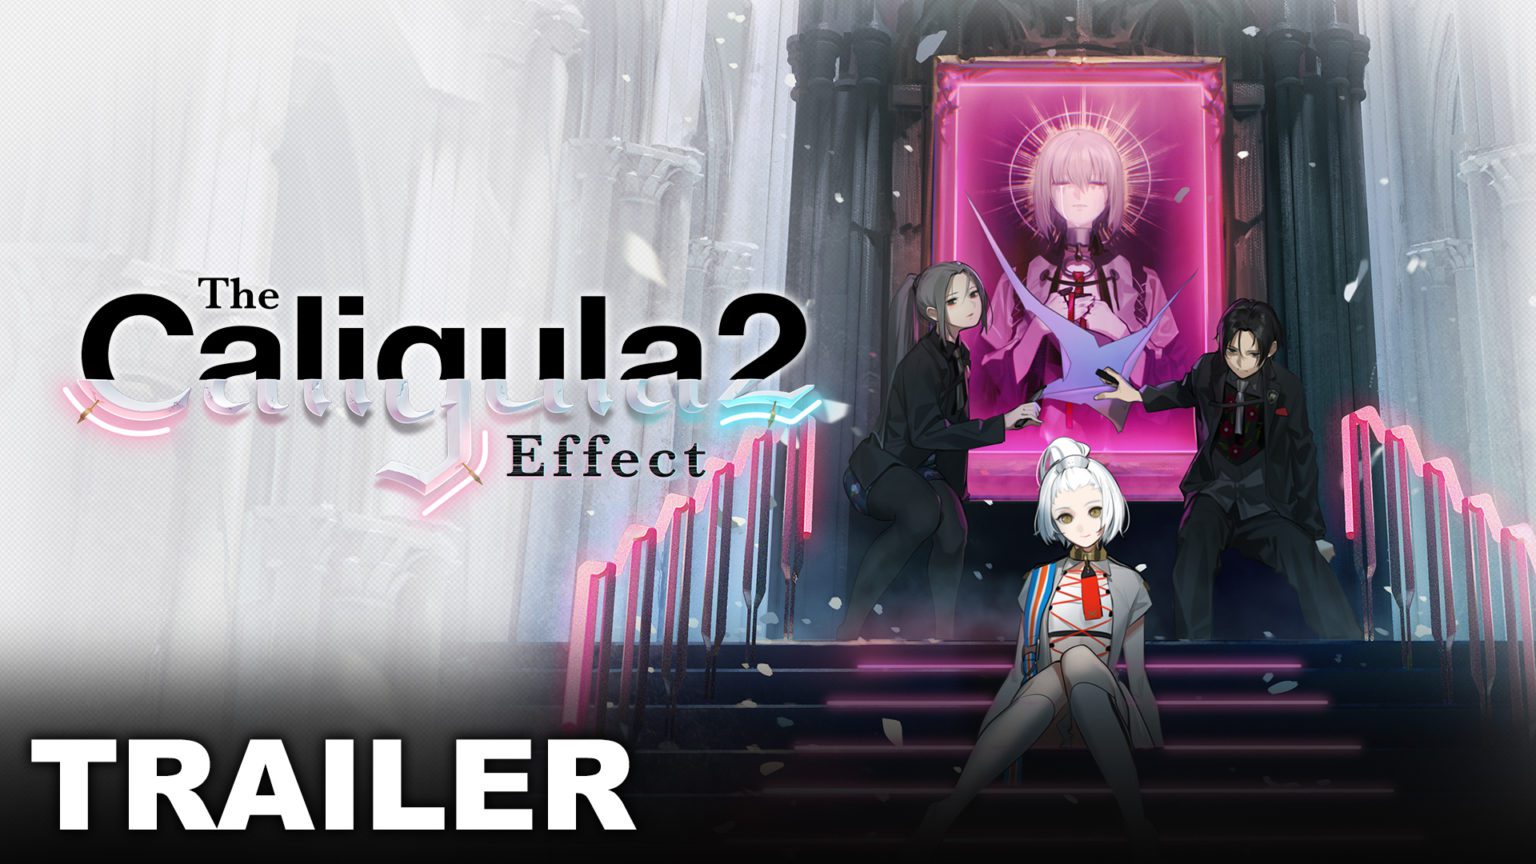 download the new version for android The Caligula Effect 2